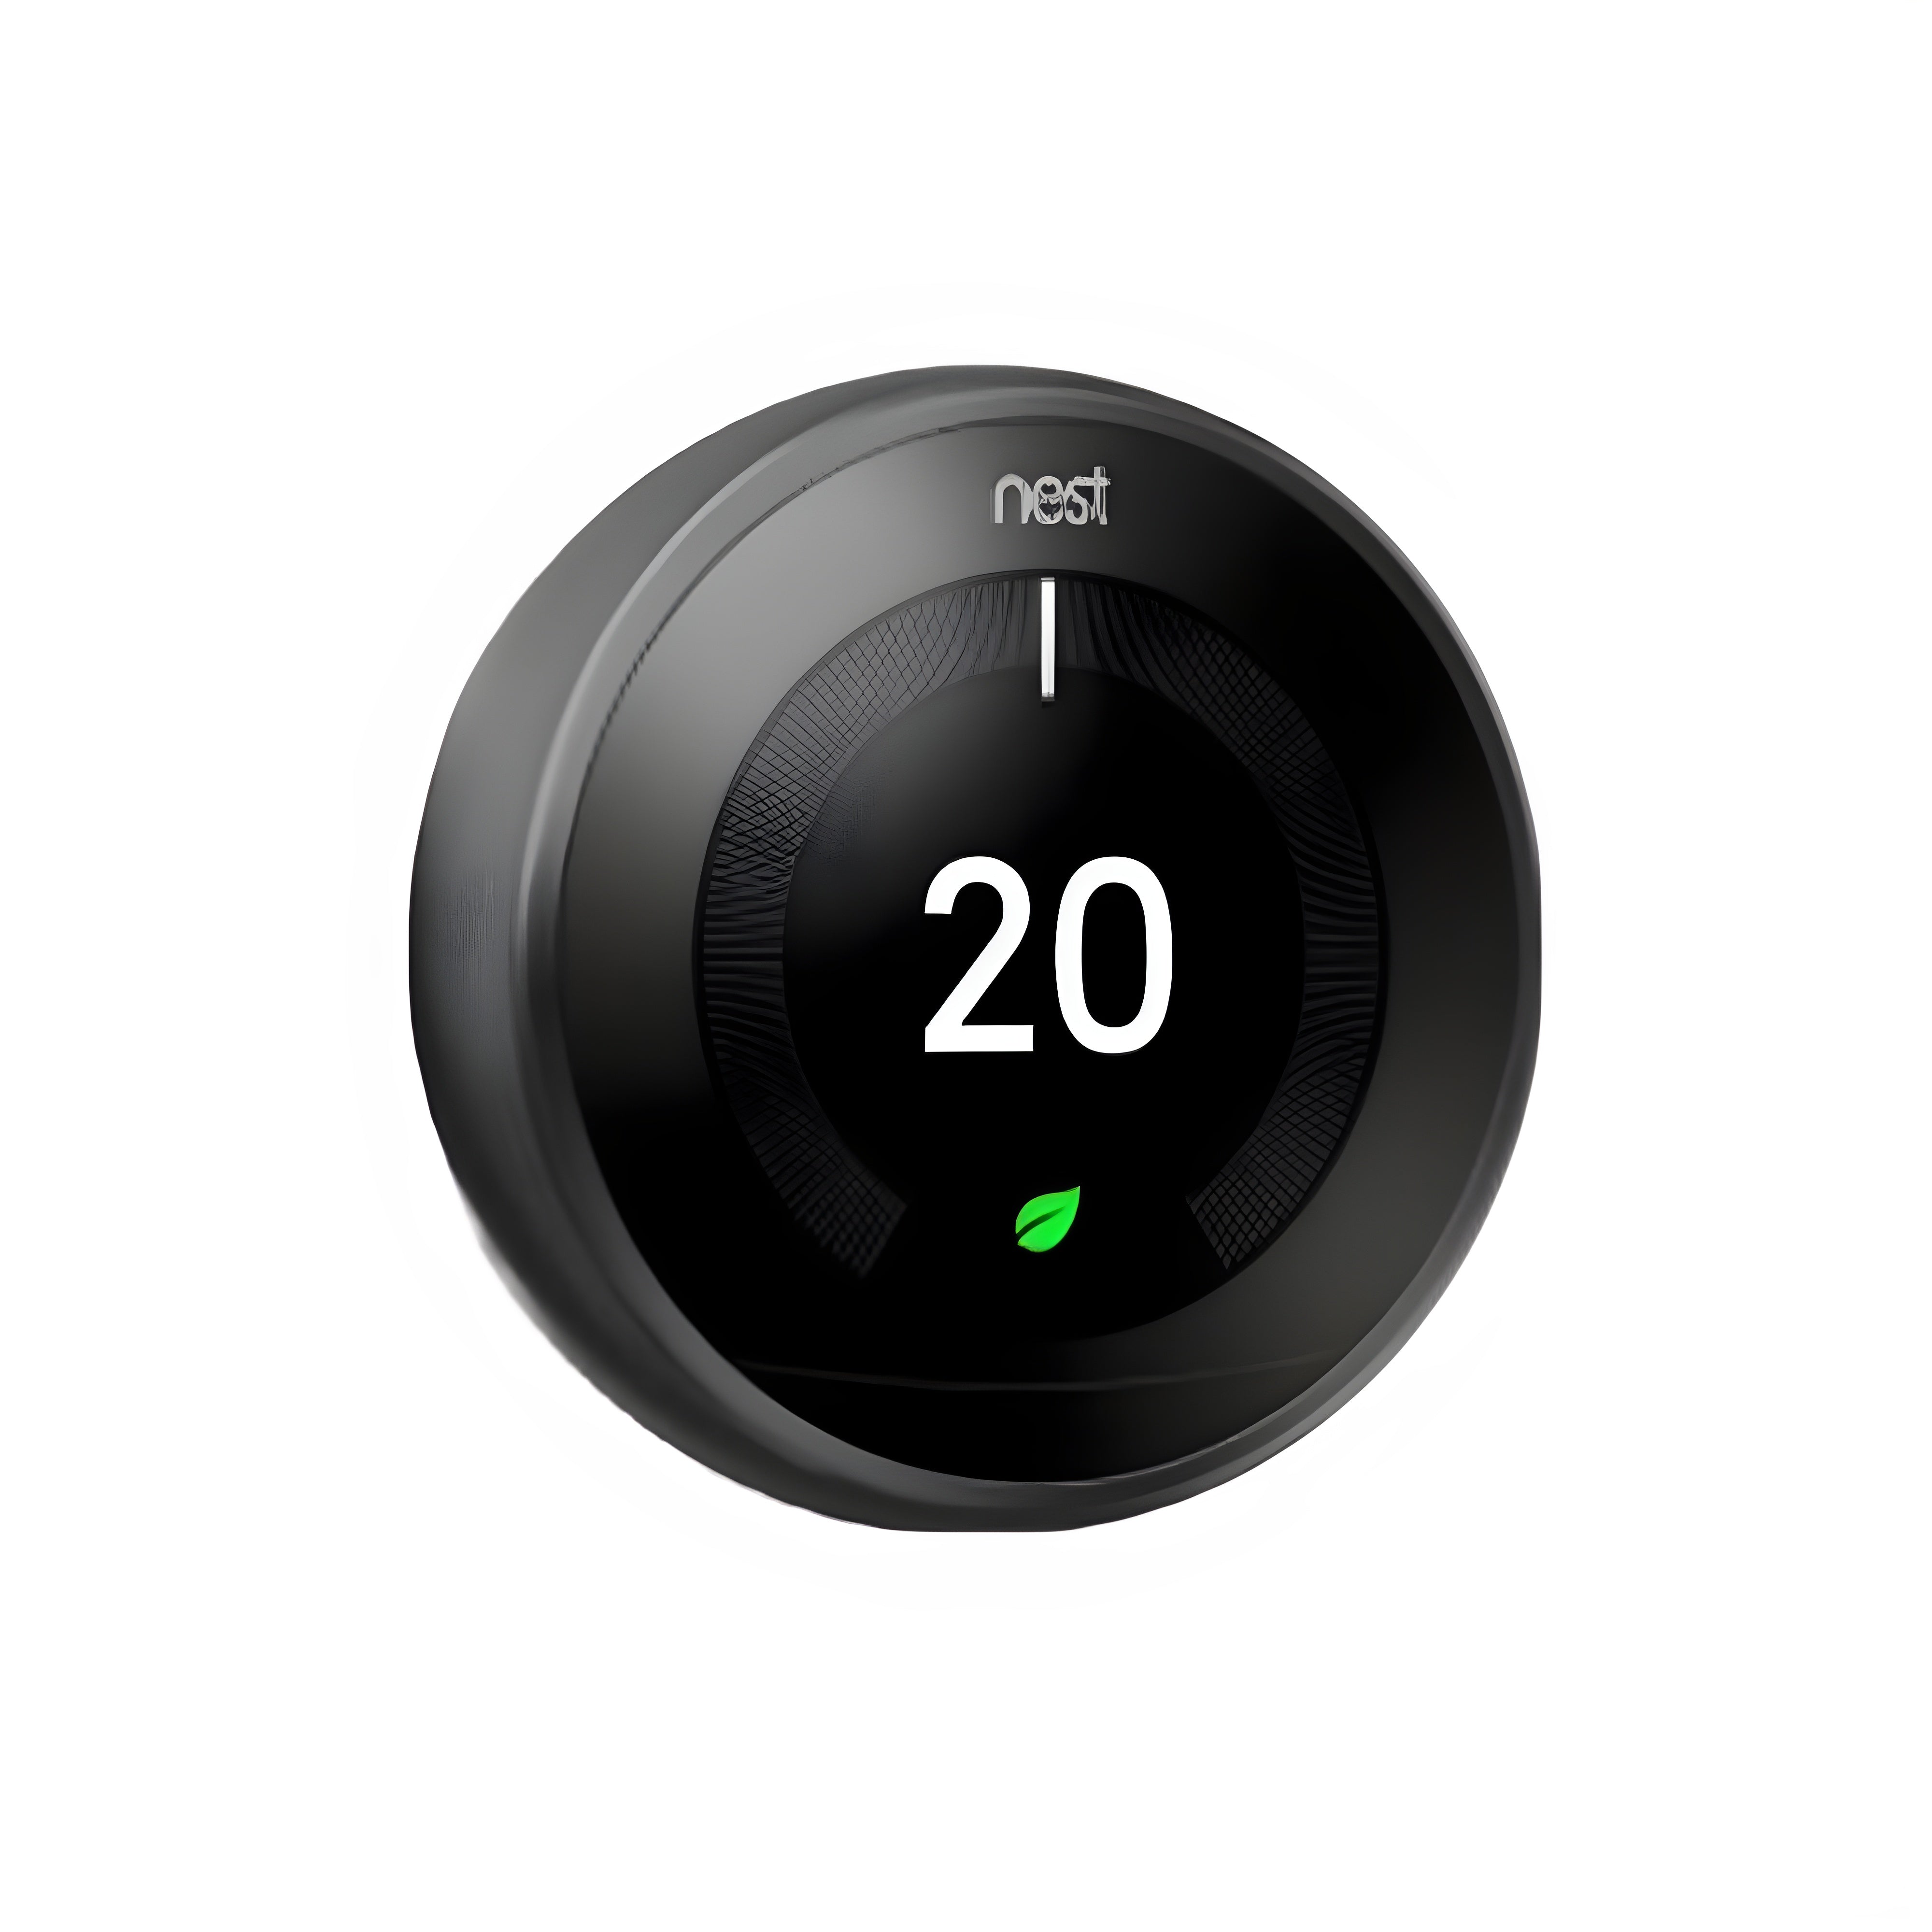 Google Nest Learning Thermostat 3rd Gen Works With Alexa and Google Assistant- UAE Warranty